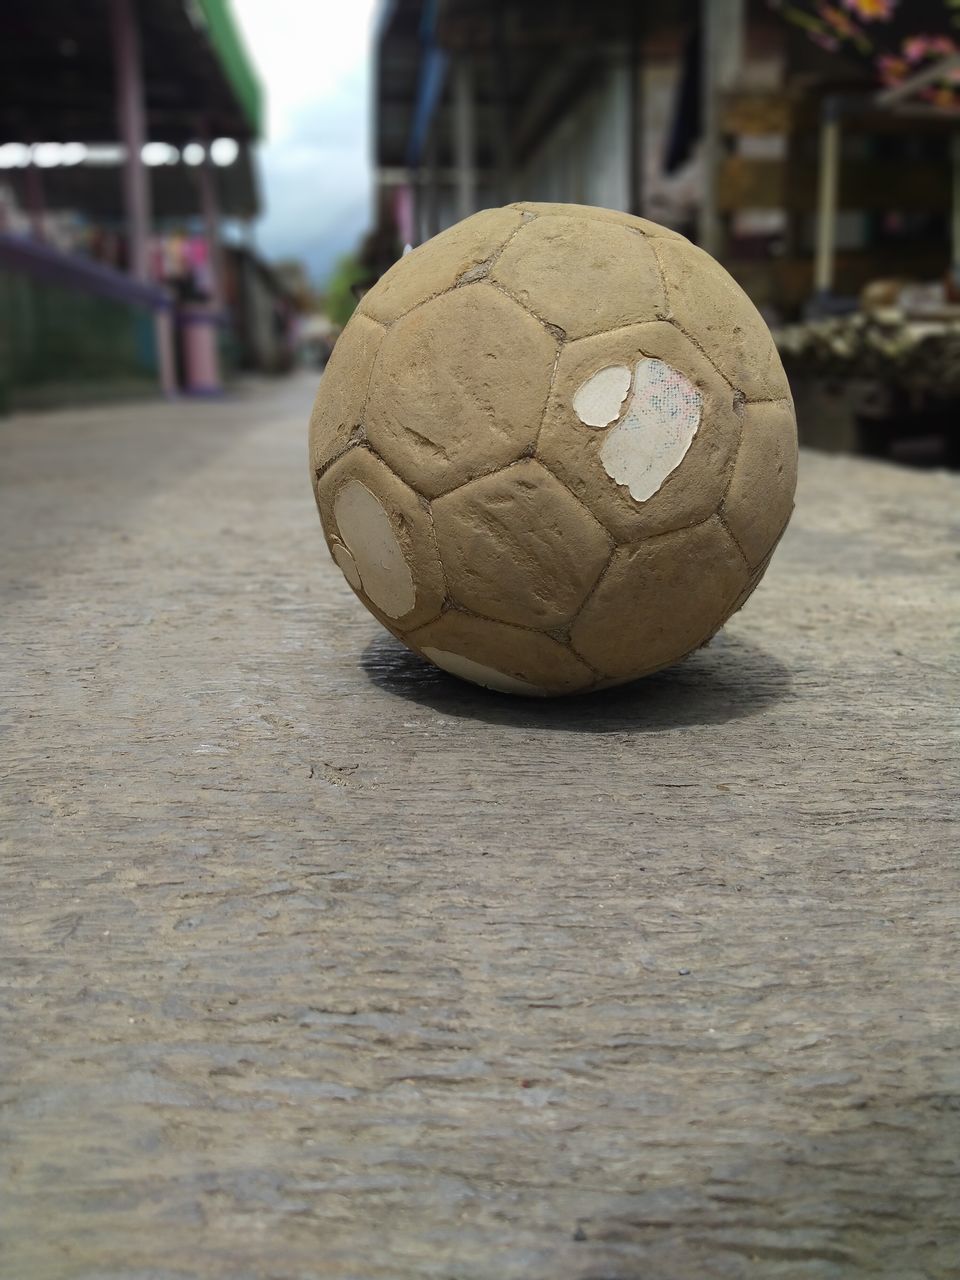 CLOSE-UP OF SOCCER BALL ON STREET LIGHT AT CITY